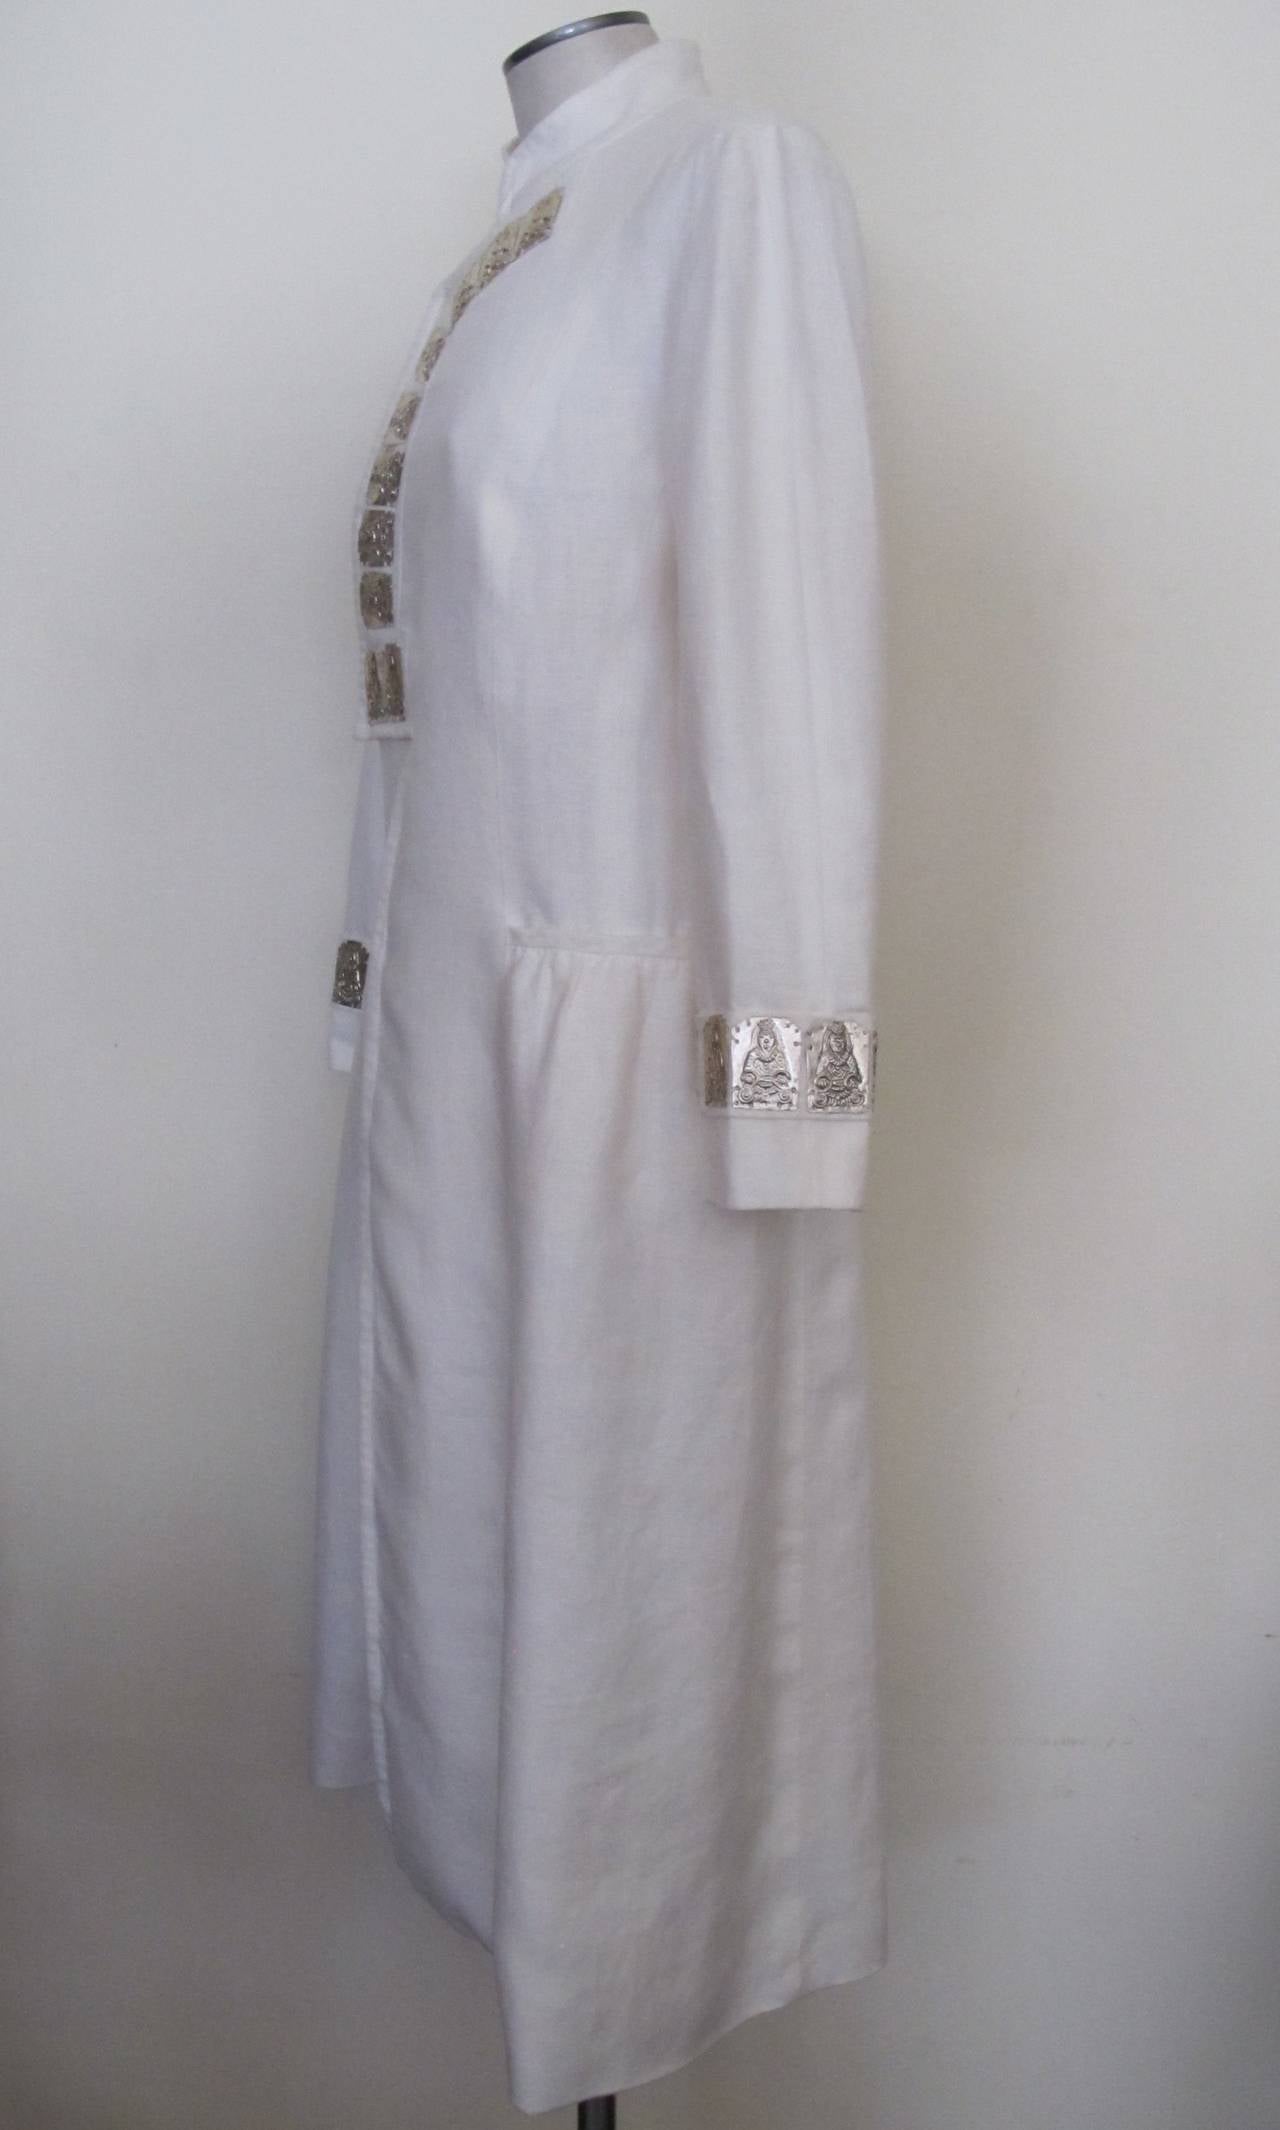 This impressive Vivienne Tam piece was donated to Helpers by the Fashion Director of Saks Fifth Avenue. It was an important piece in her collection. She was a member of the Buddhist Church. The mandarin collar white linen dress has 10 Buddha